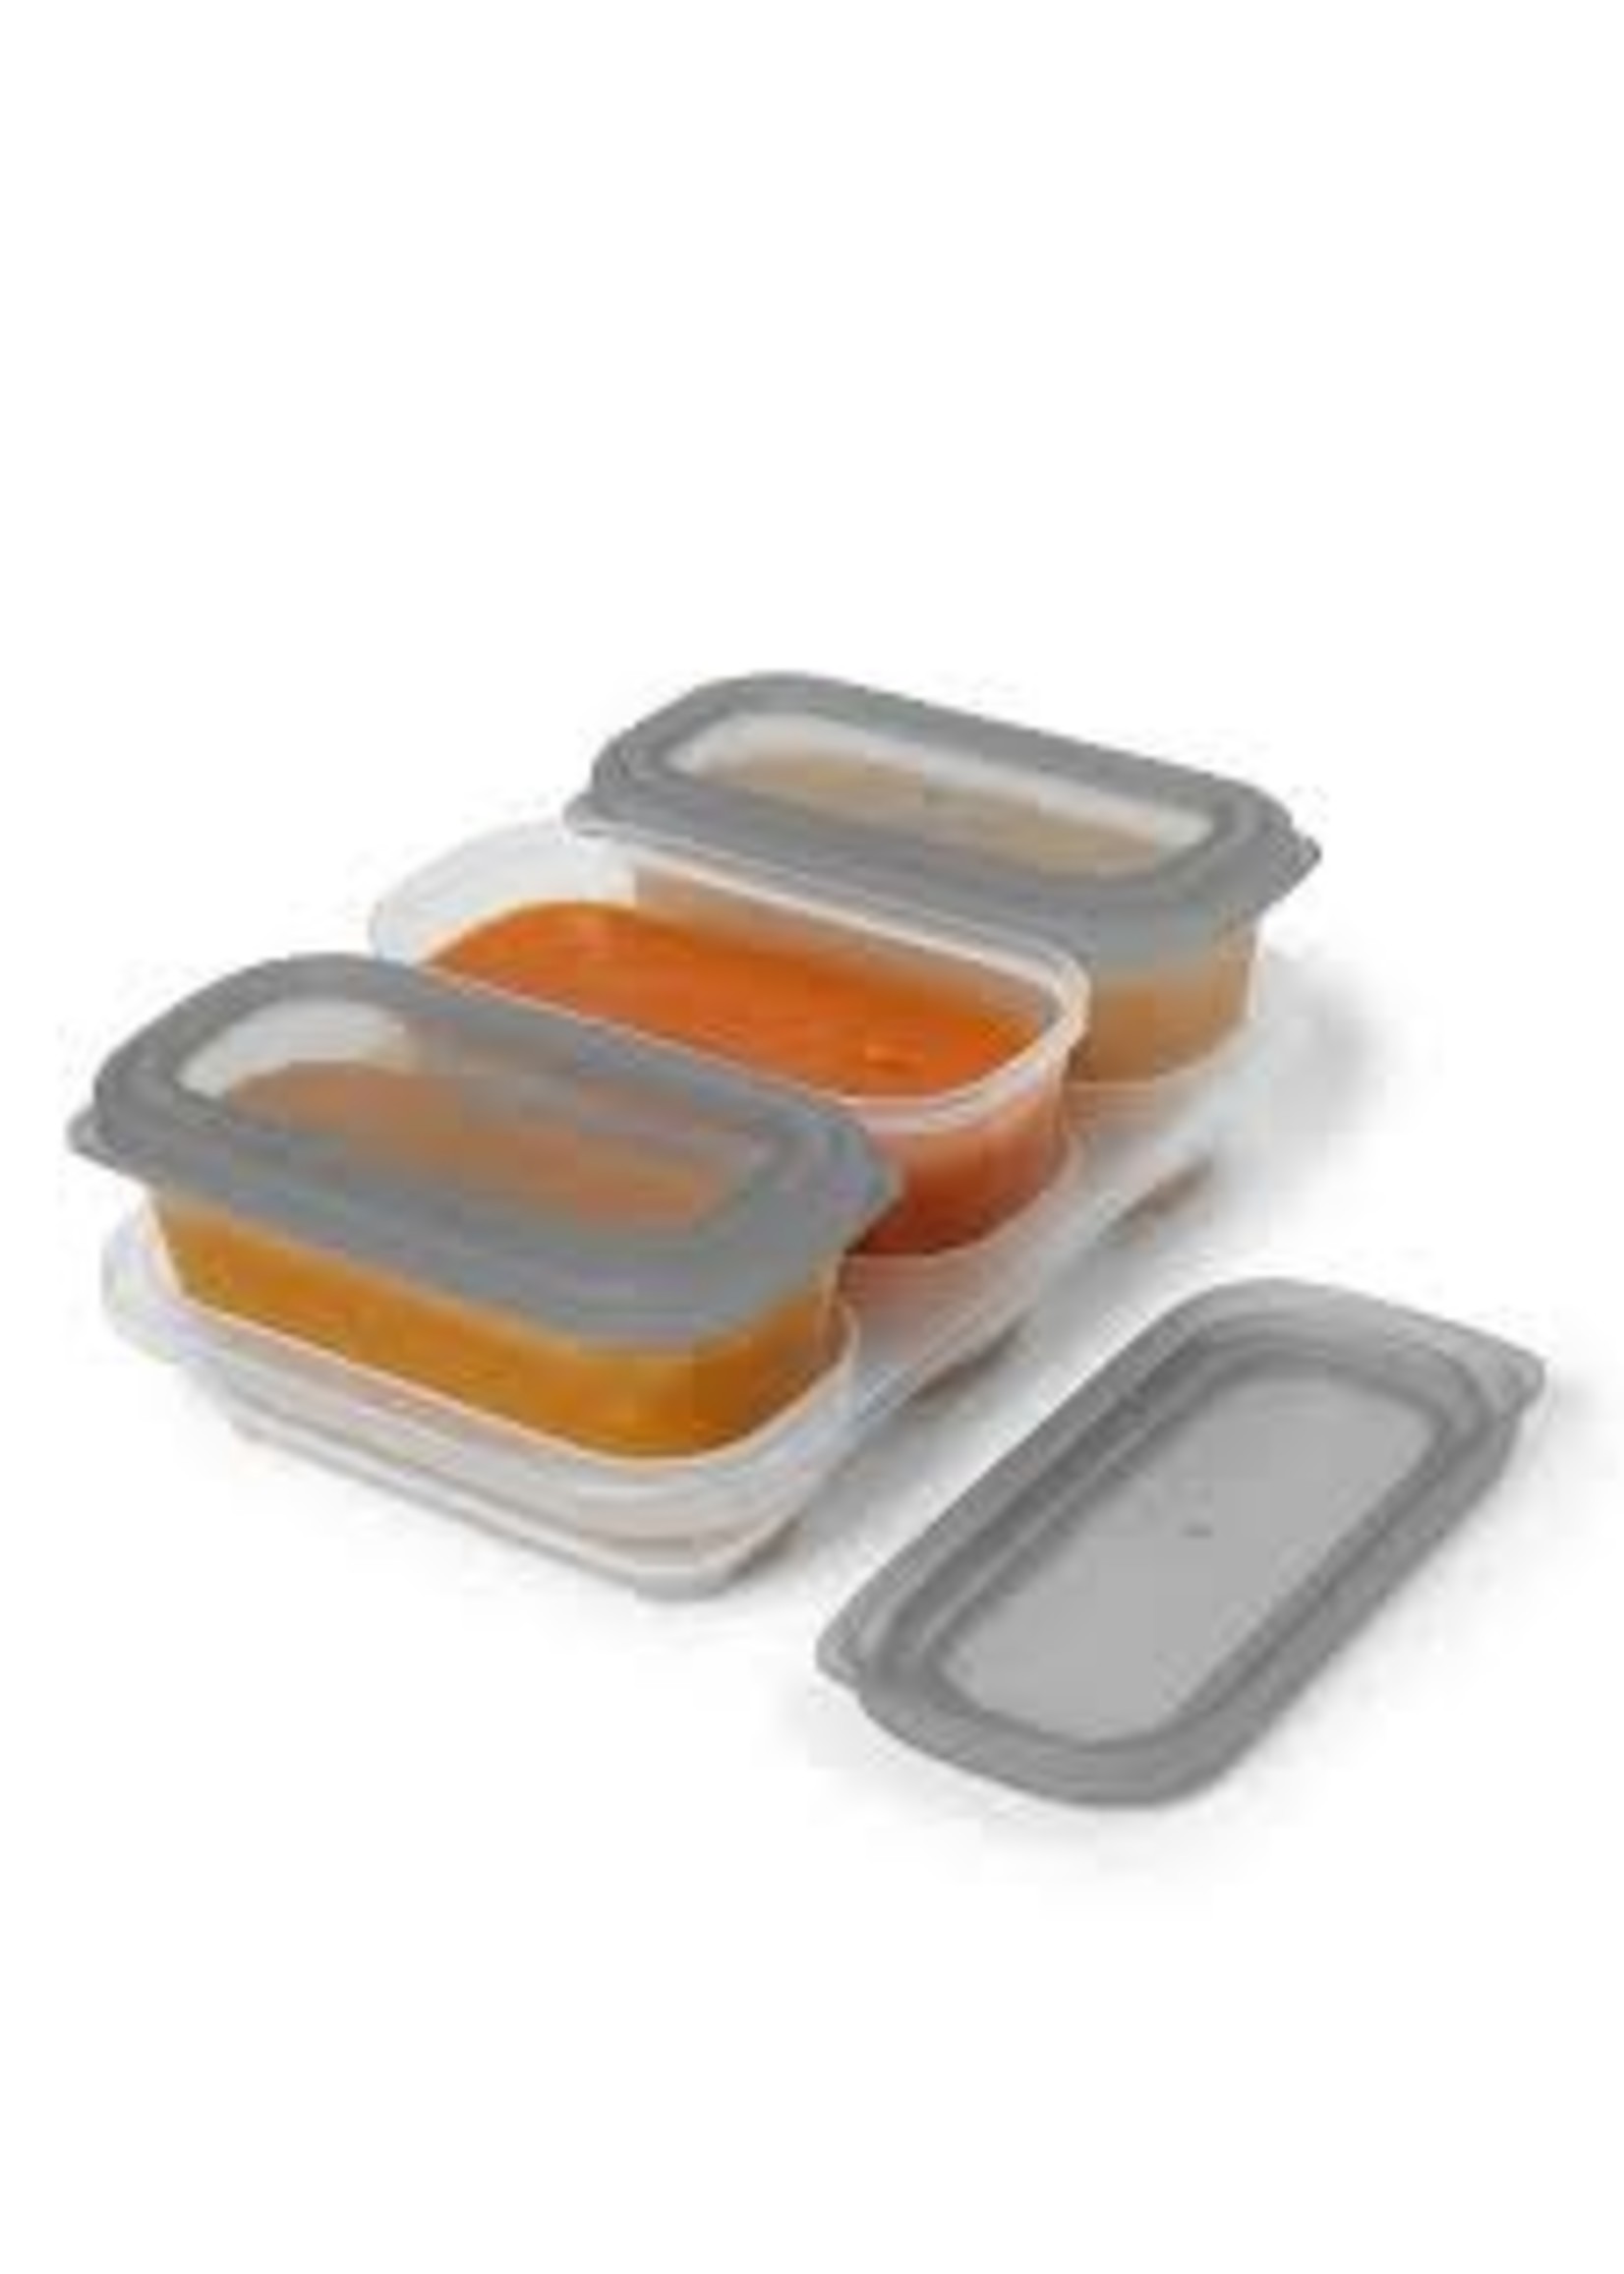 Easy-Store 4 oz Containers (120 ml)